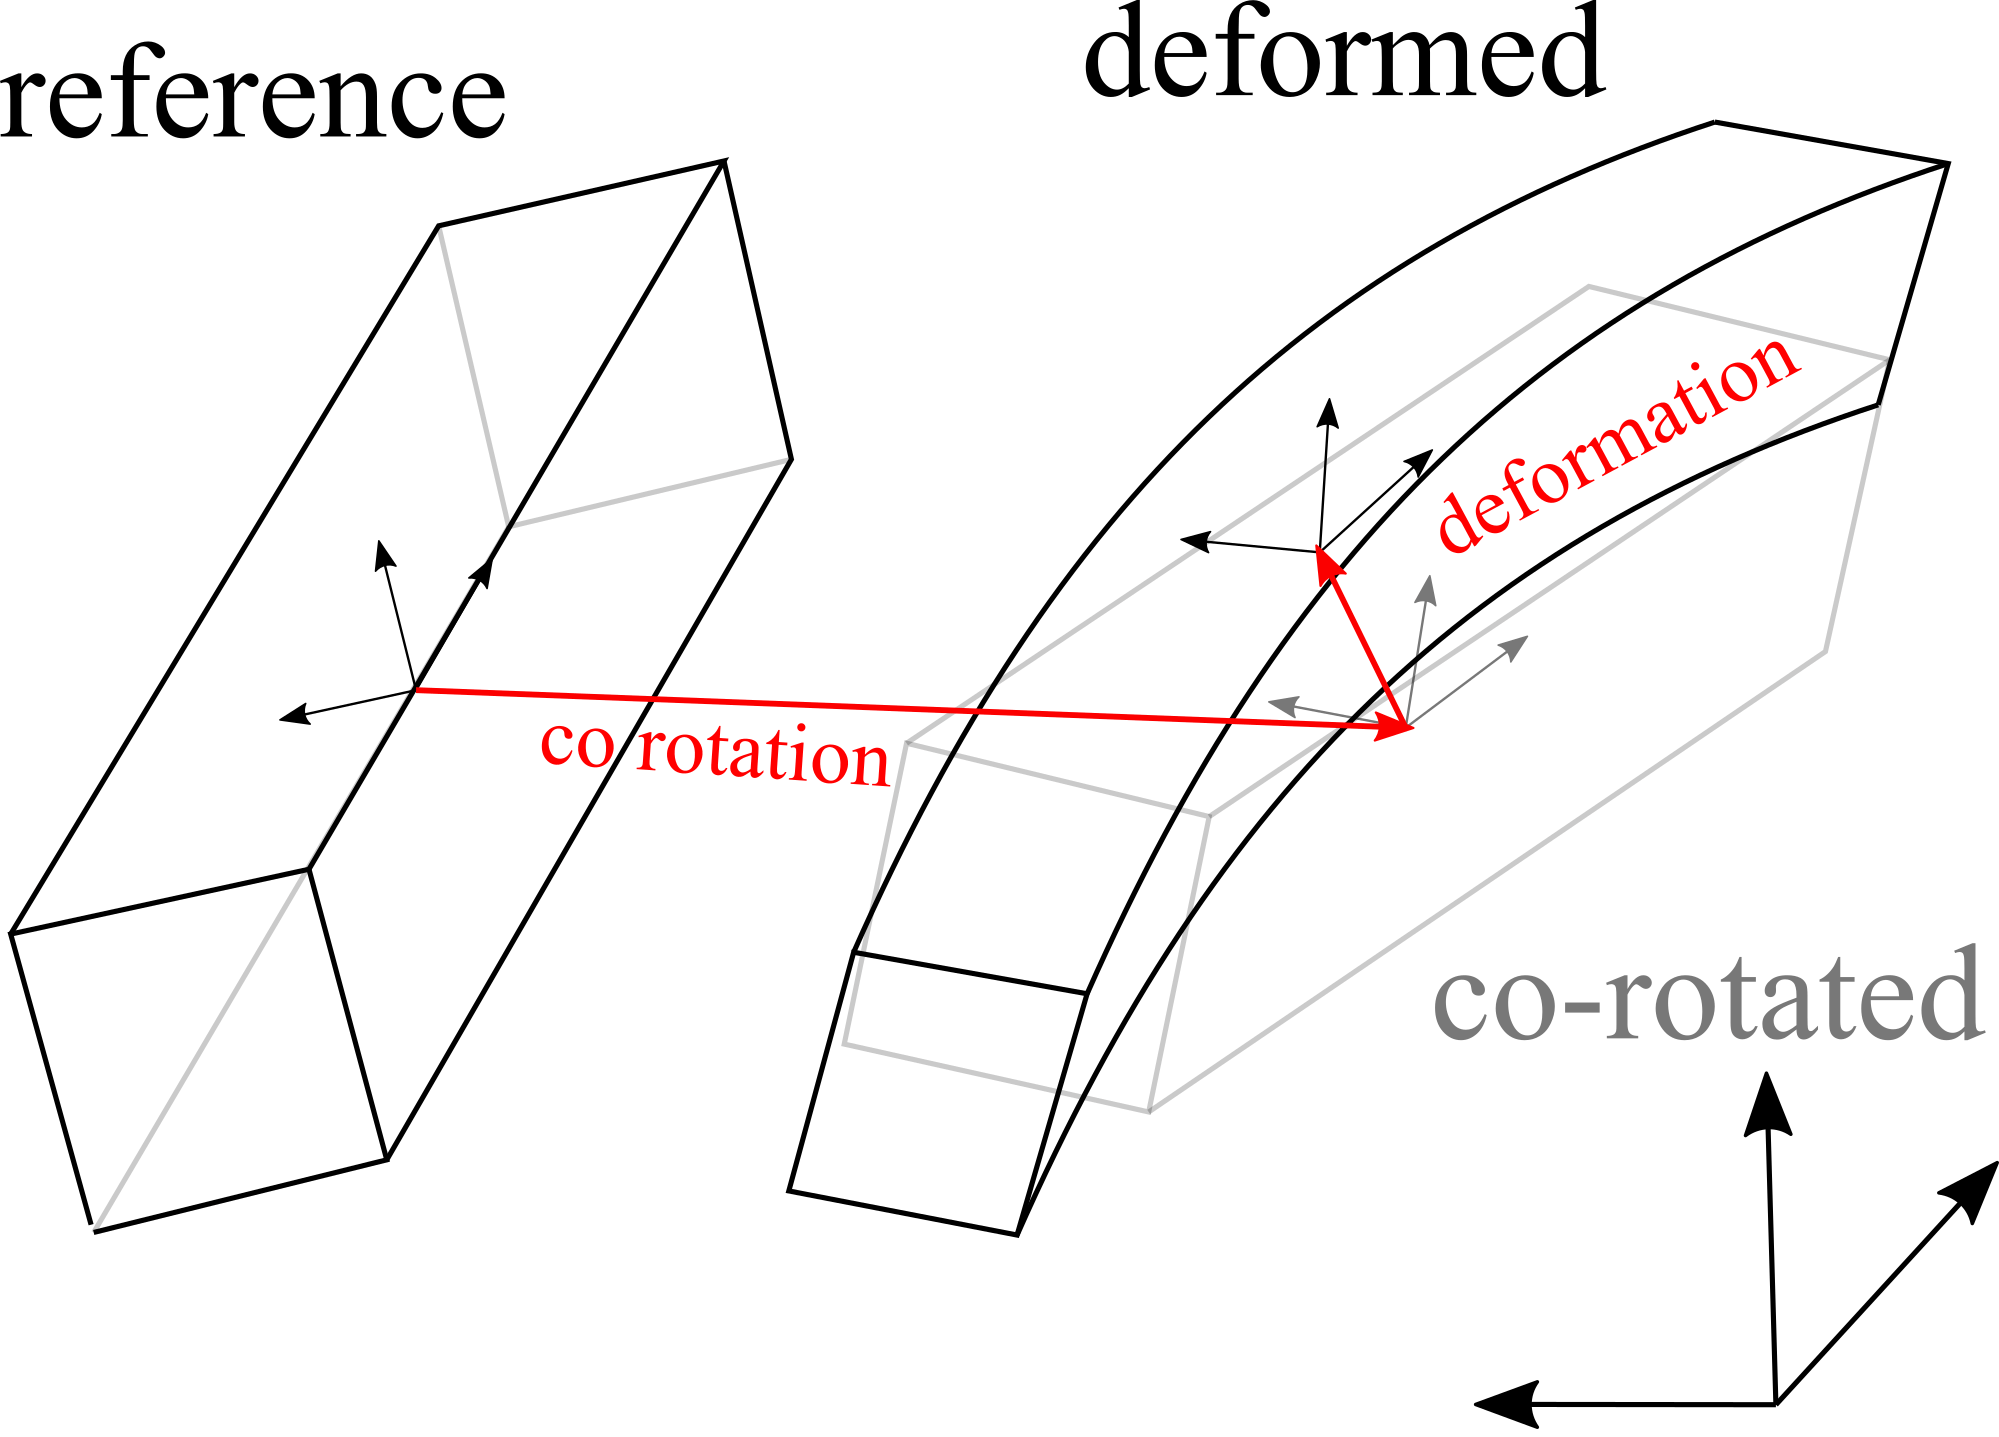 Forces on a 2D airfoil